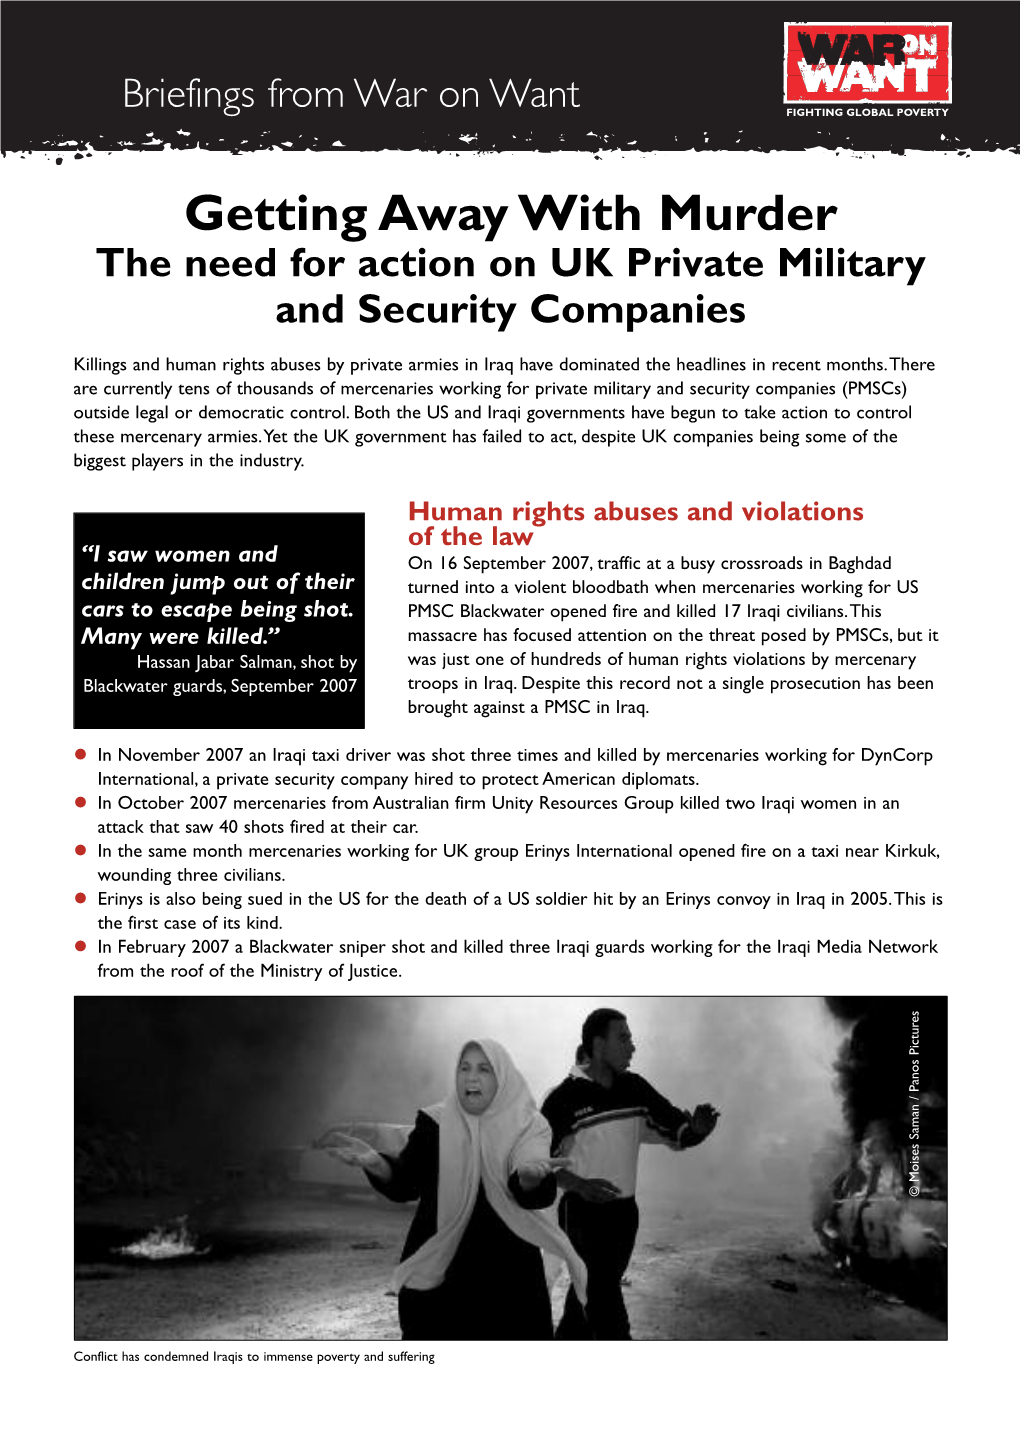 The Need for Action on UK Private Military and Security Companies